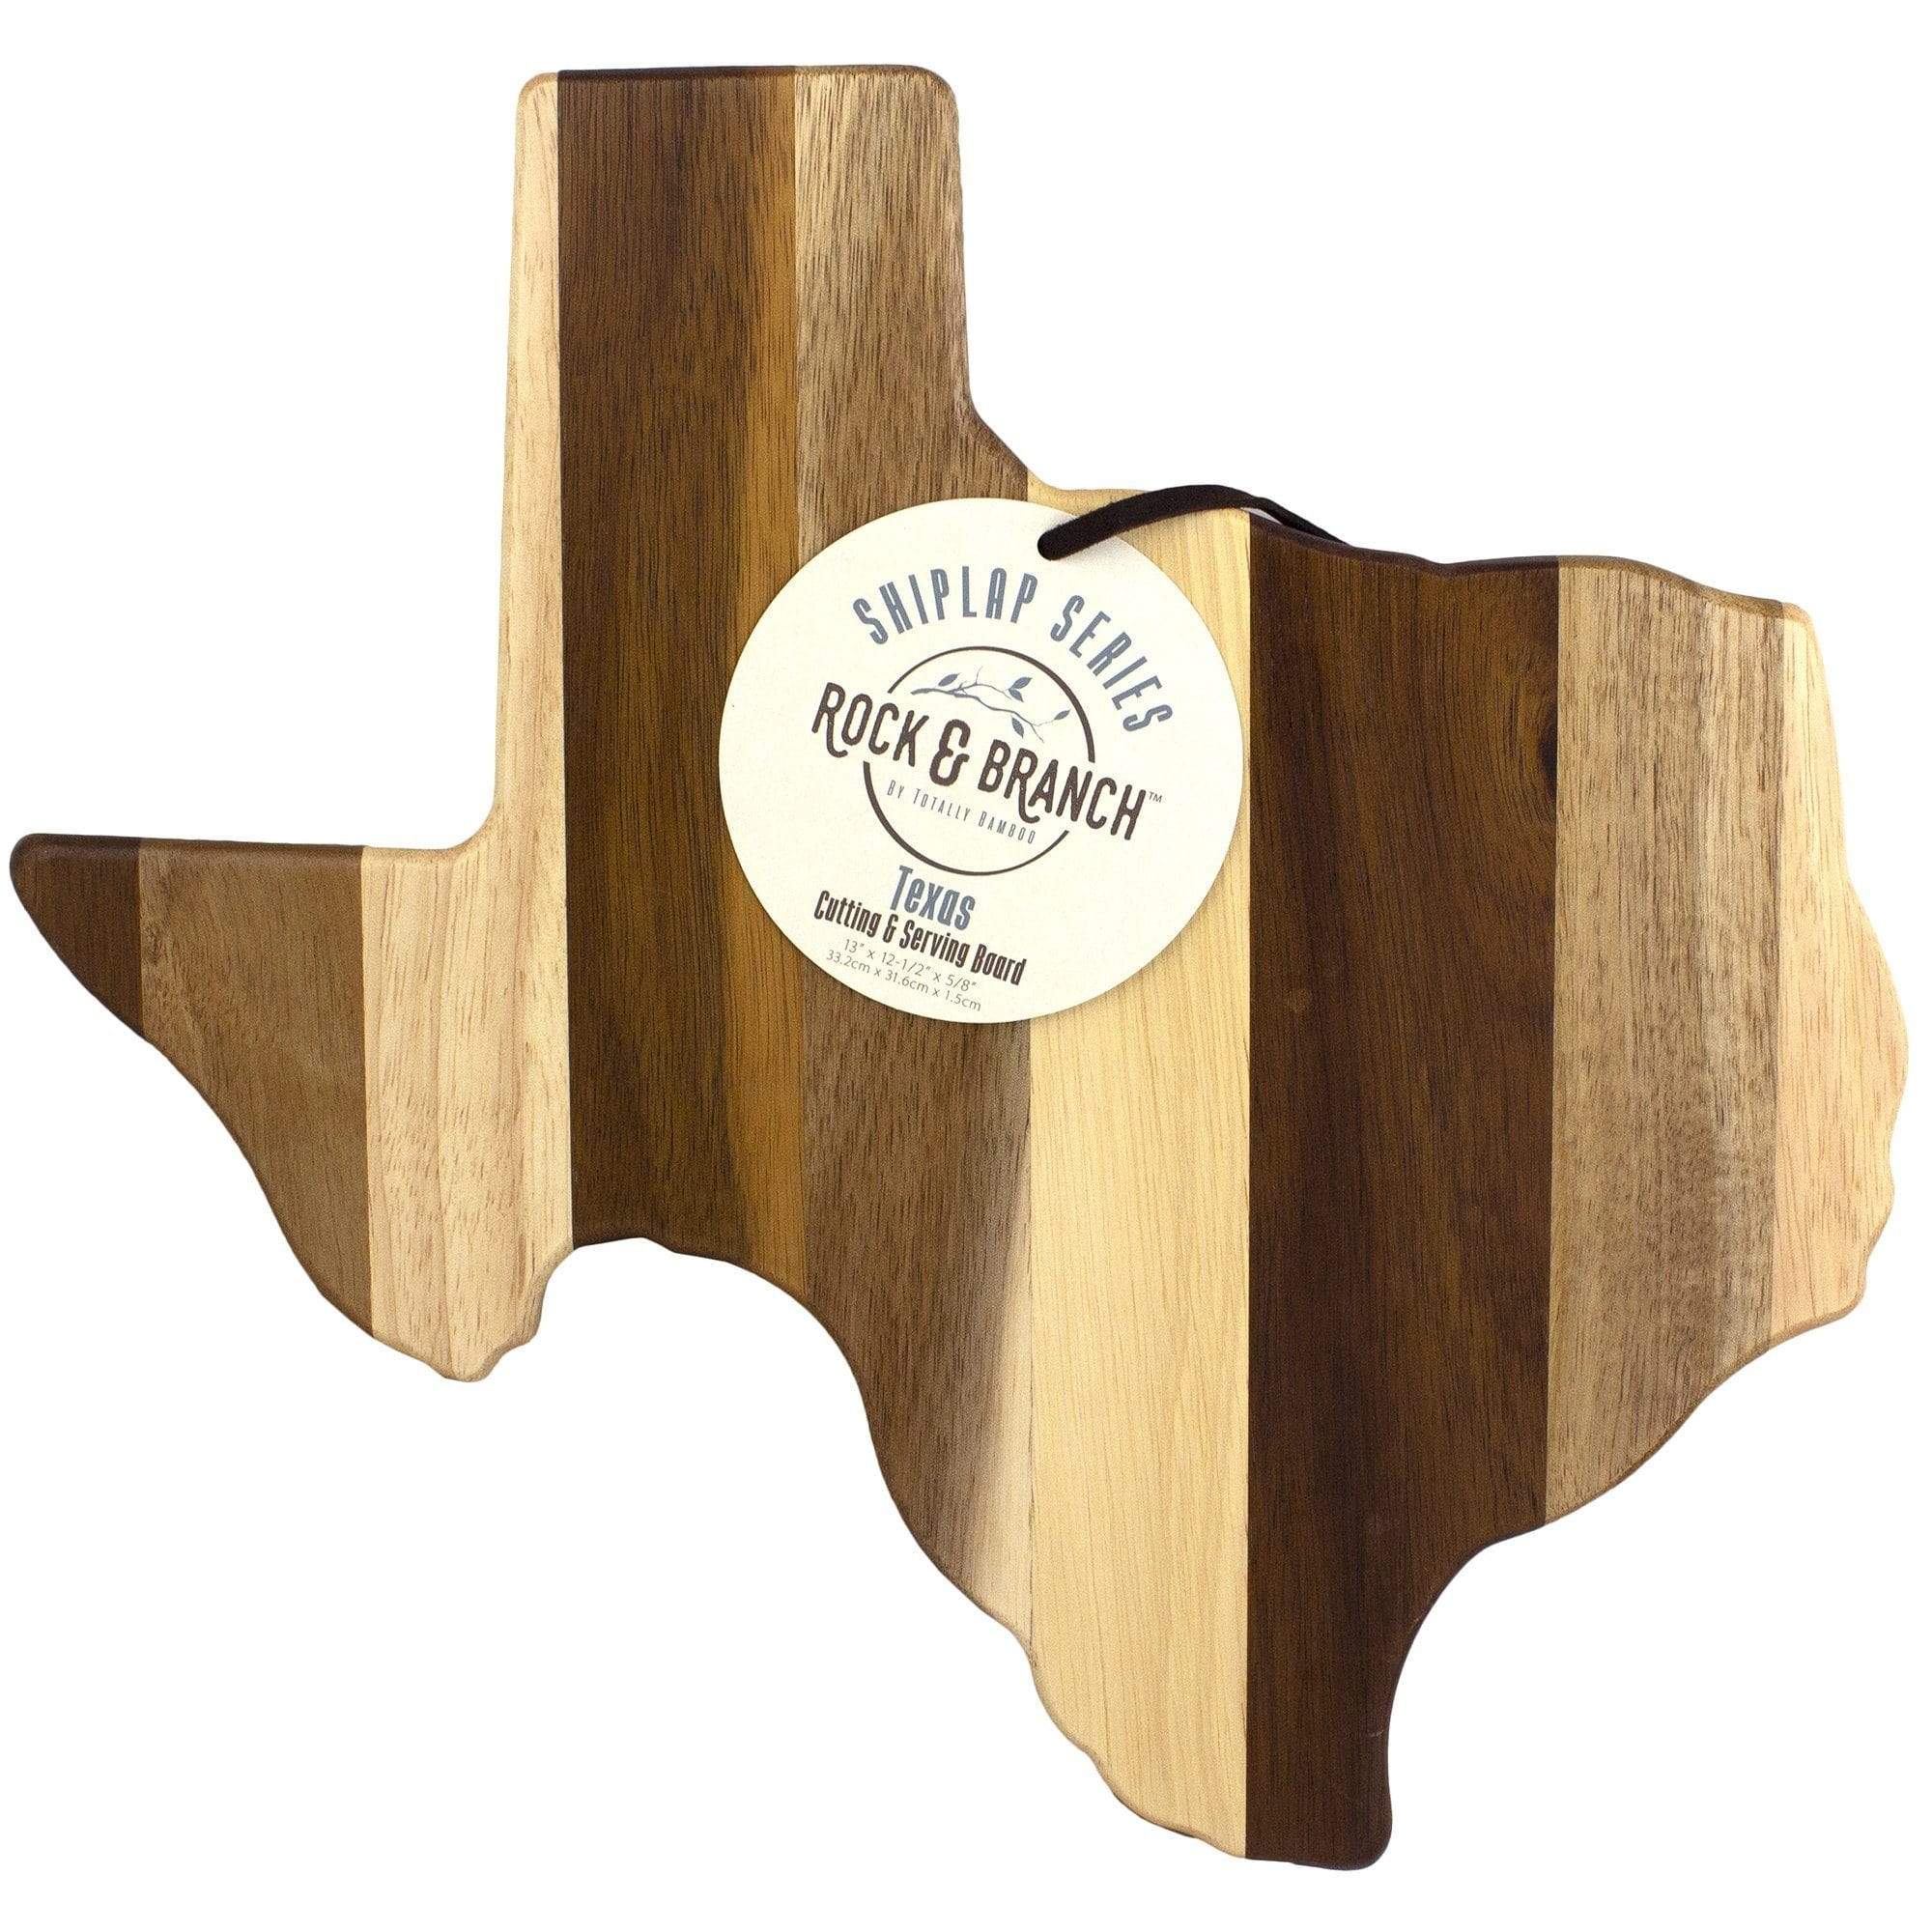 Totally Bamboo Rock & Branch® Shiplap Series Texas State Shaped Wood Serving and Cutting Board